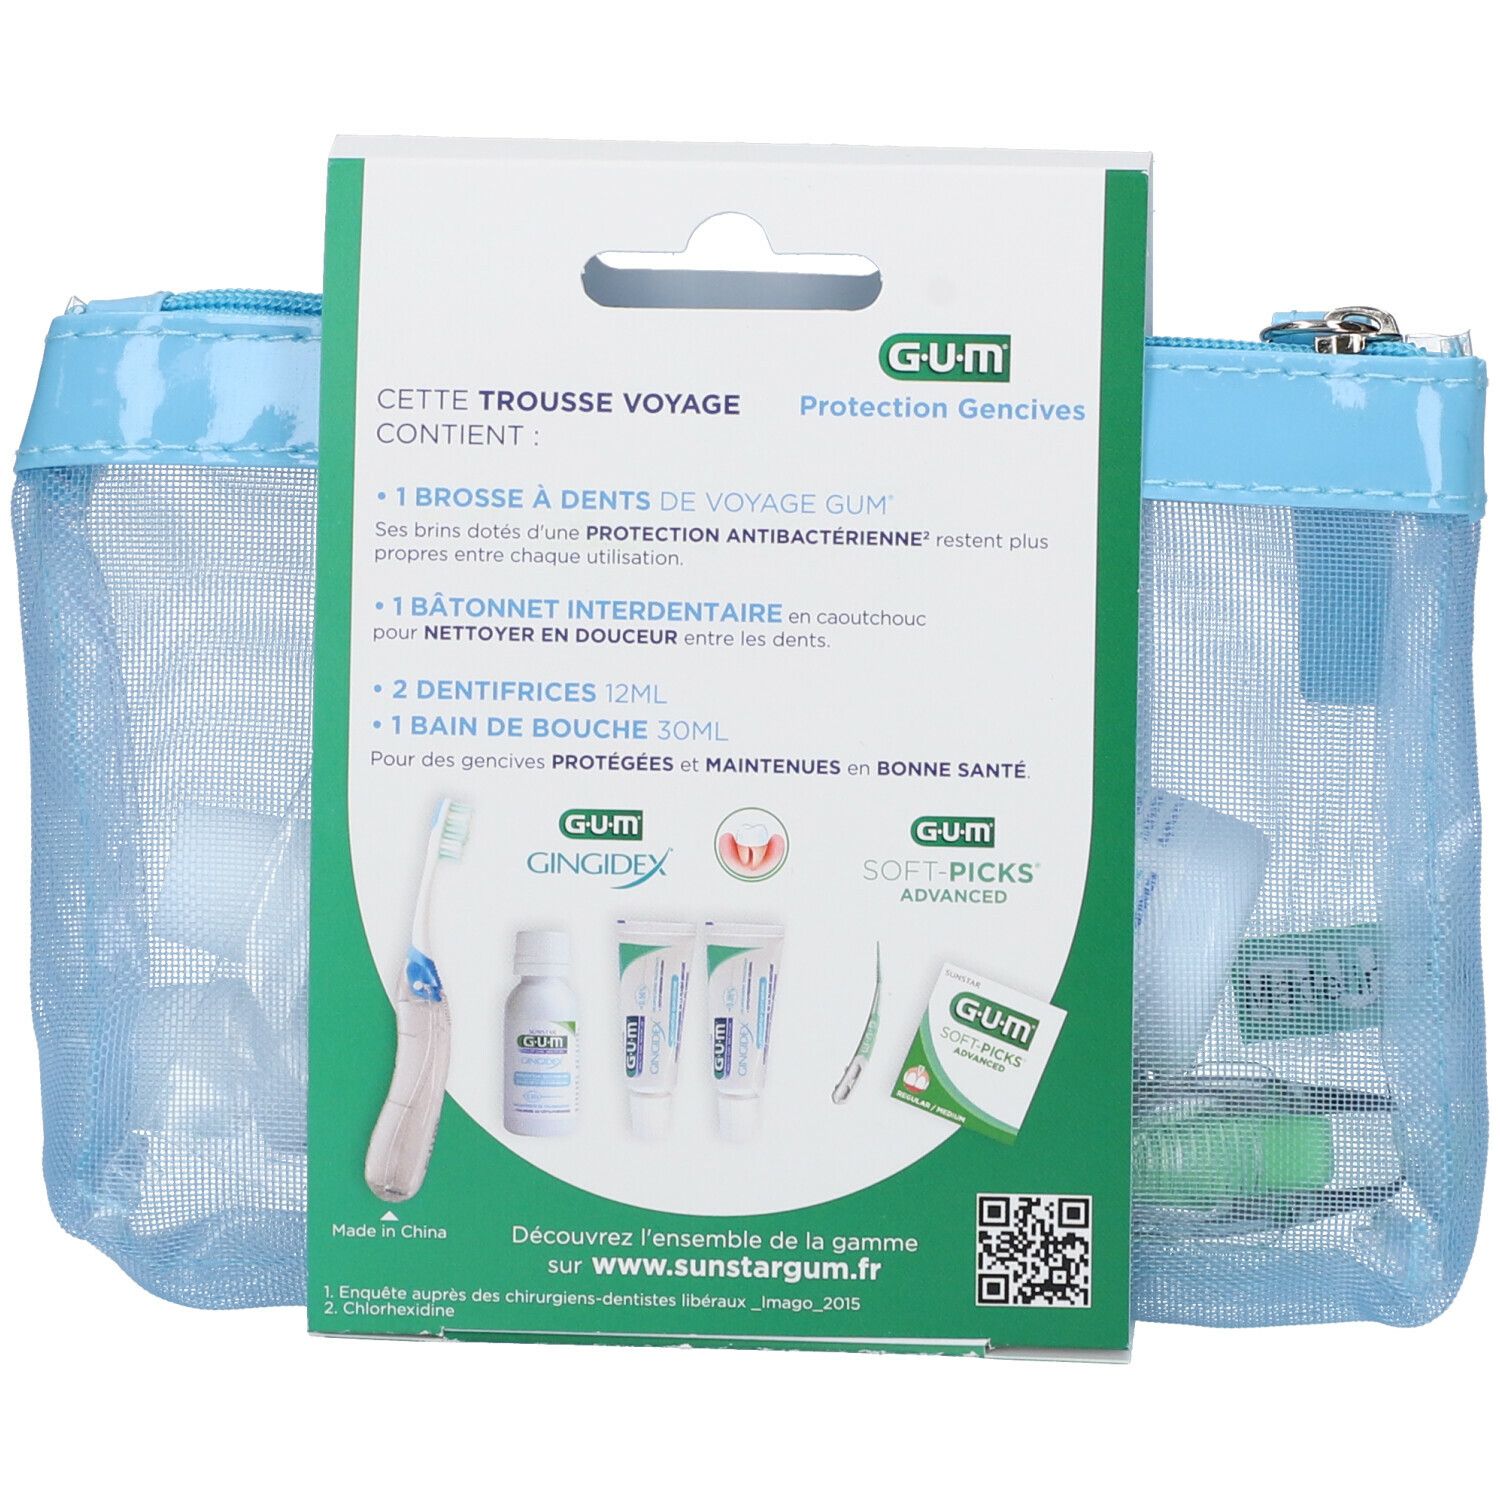 GUM® Trousse Voyage Protection Gencives 1 pc(s) - Redcare Pharmacie